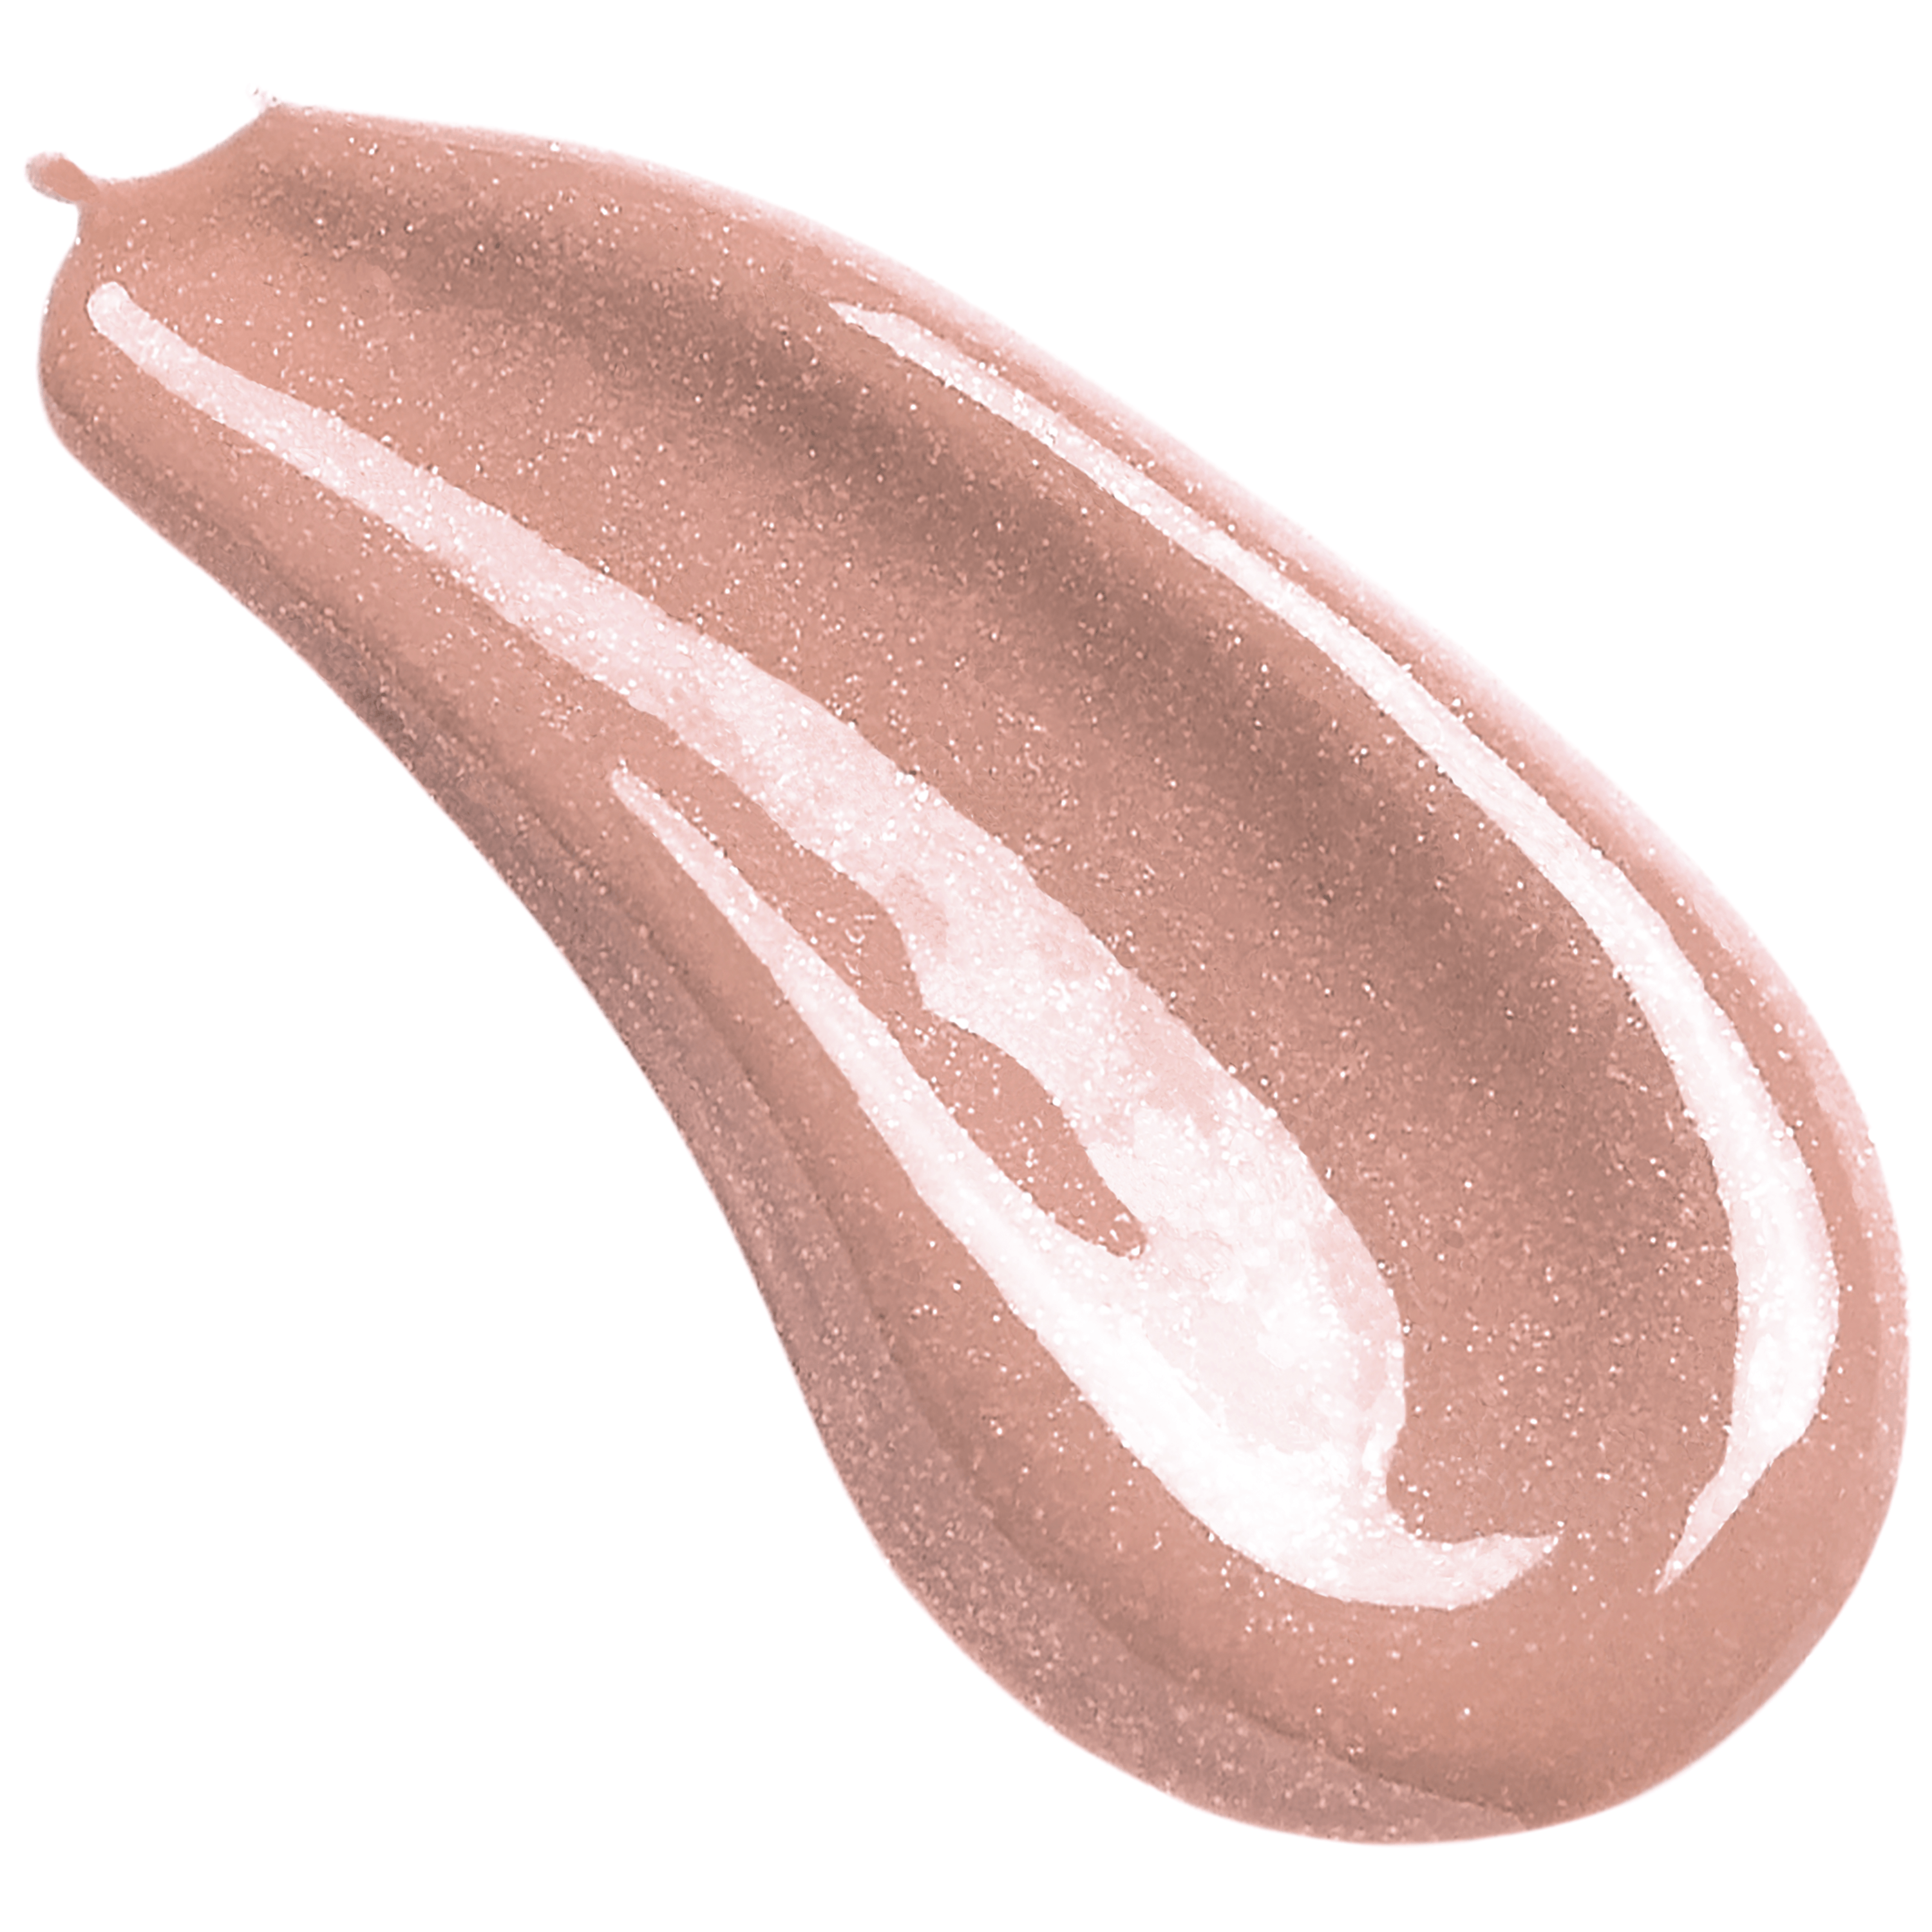 Maybelline Summer Mckeen Lip Gloss Makeup Ultra Shiny Glossy Finish, Tan Line - image 3 of 10